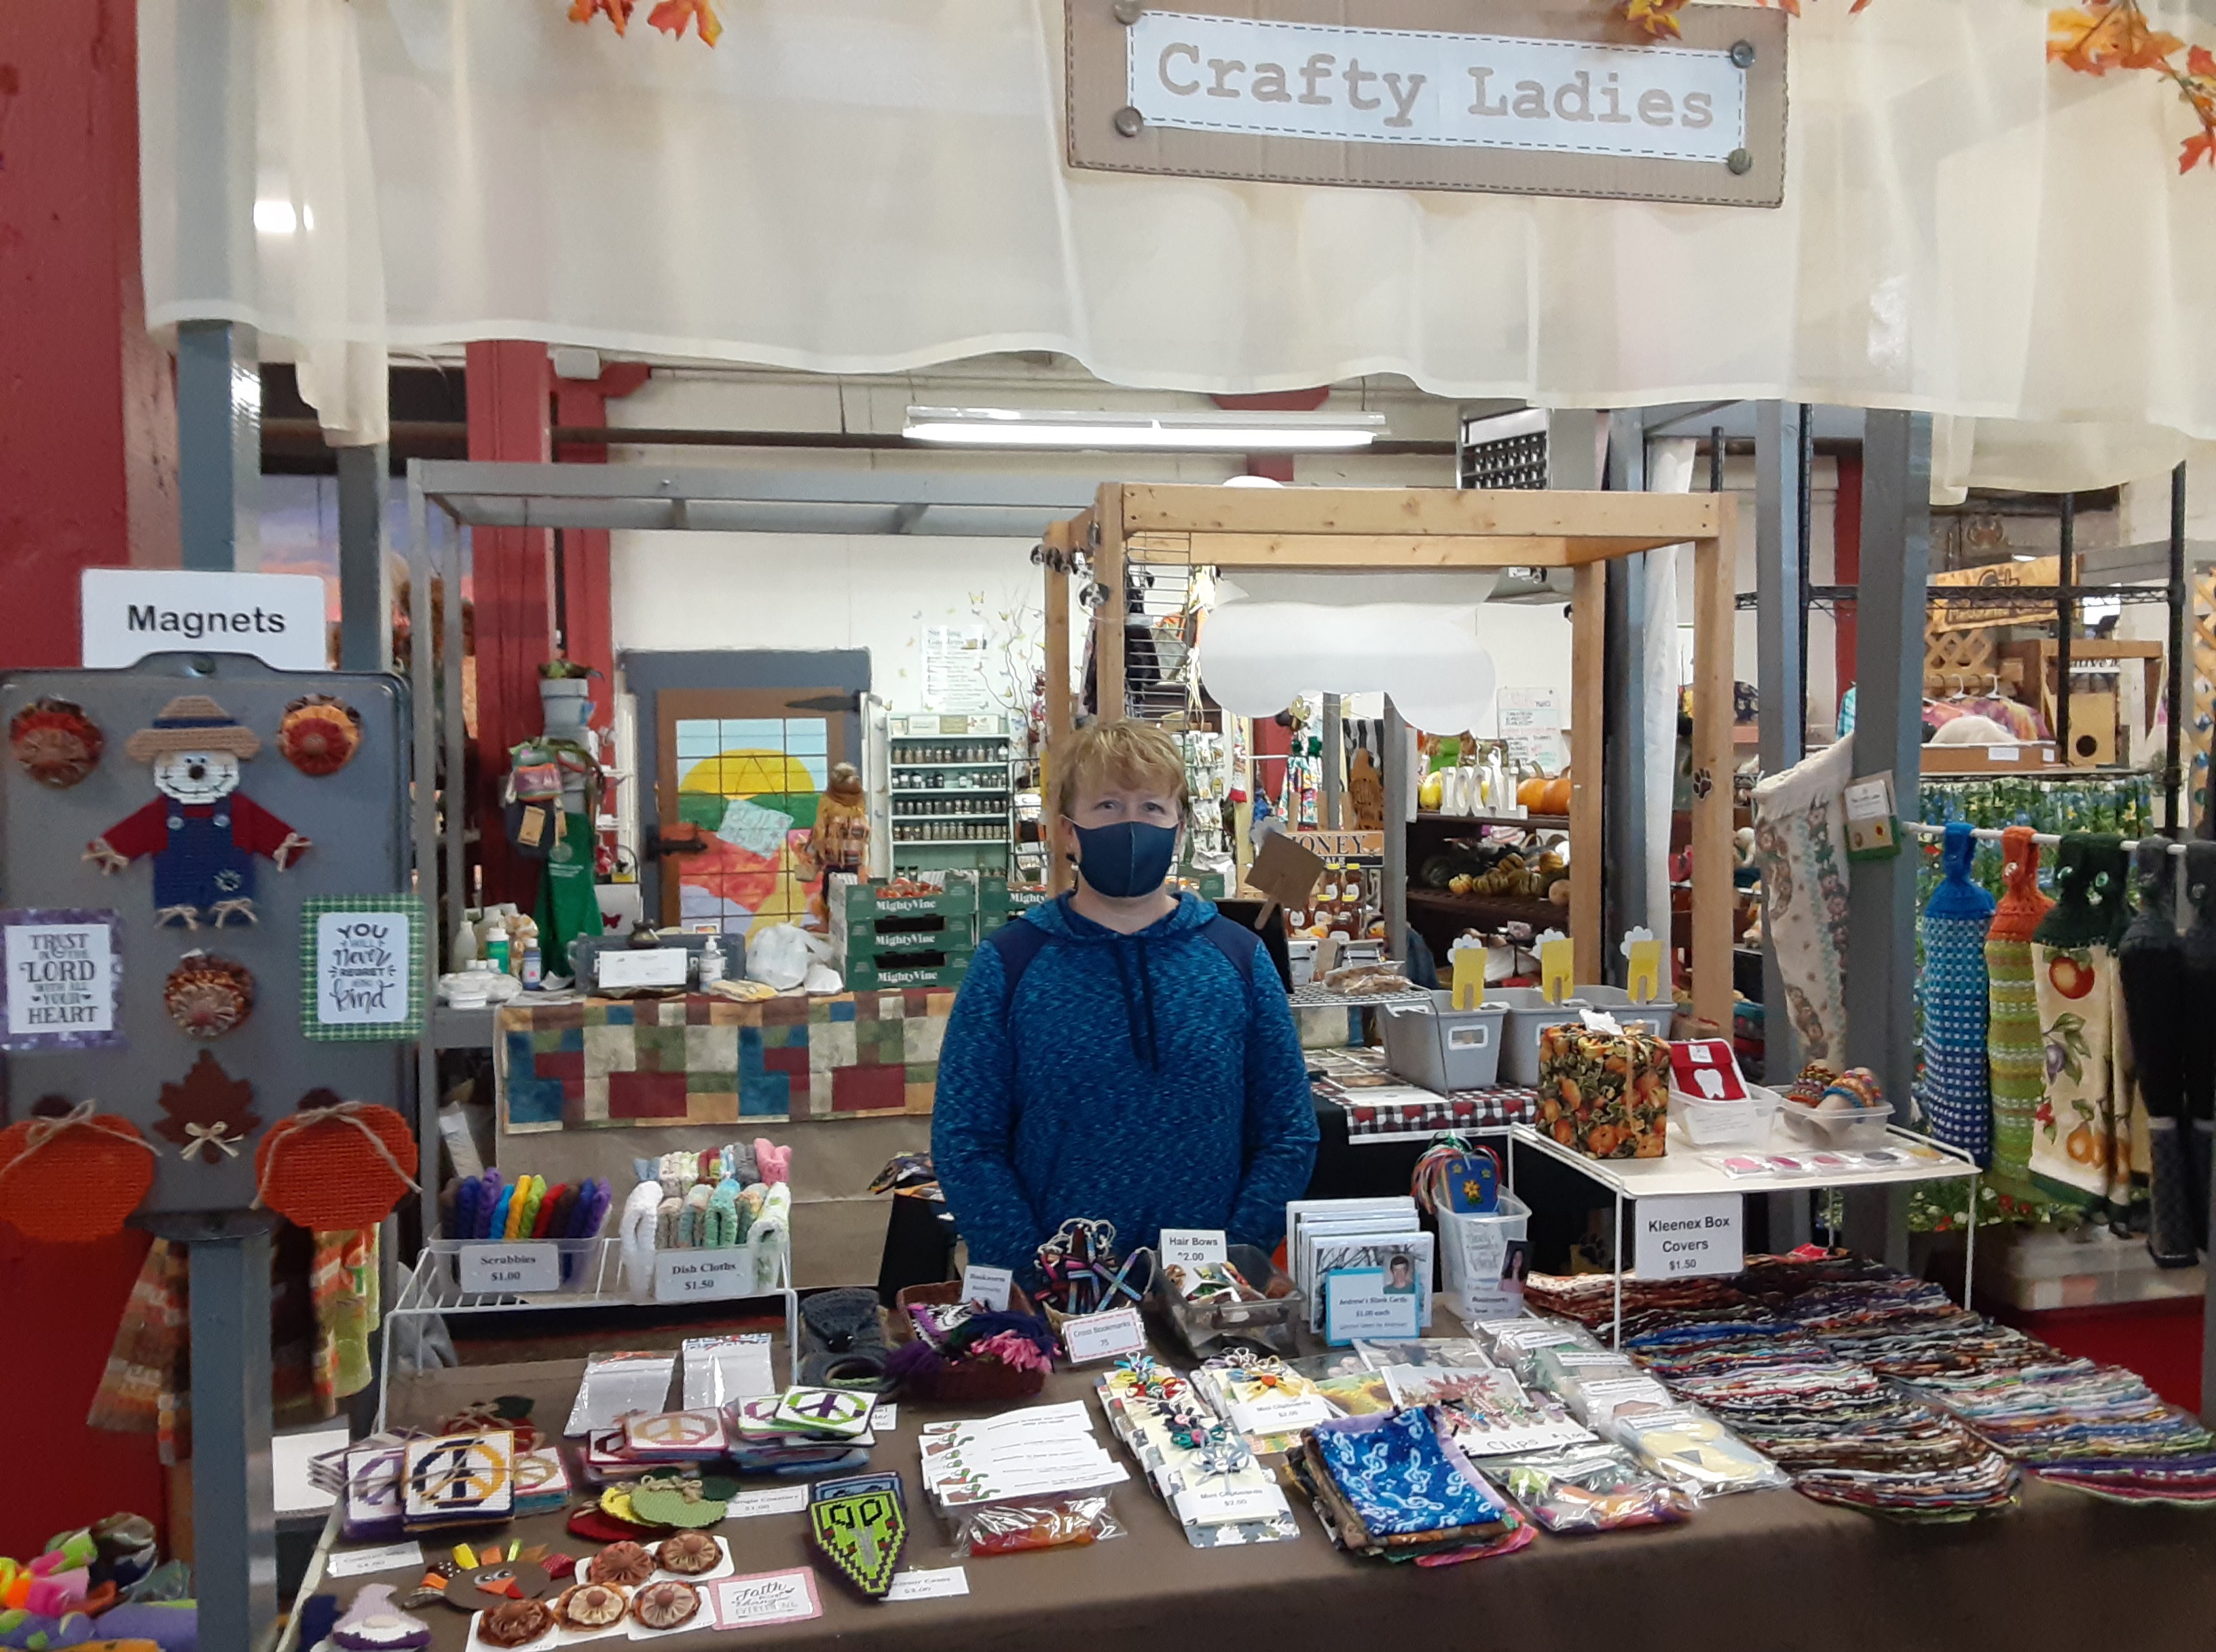 The Crafty Ladies booth at the Twin City Farmer's Market